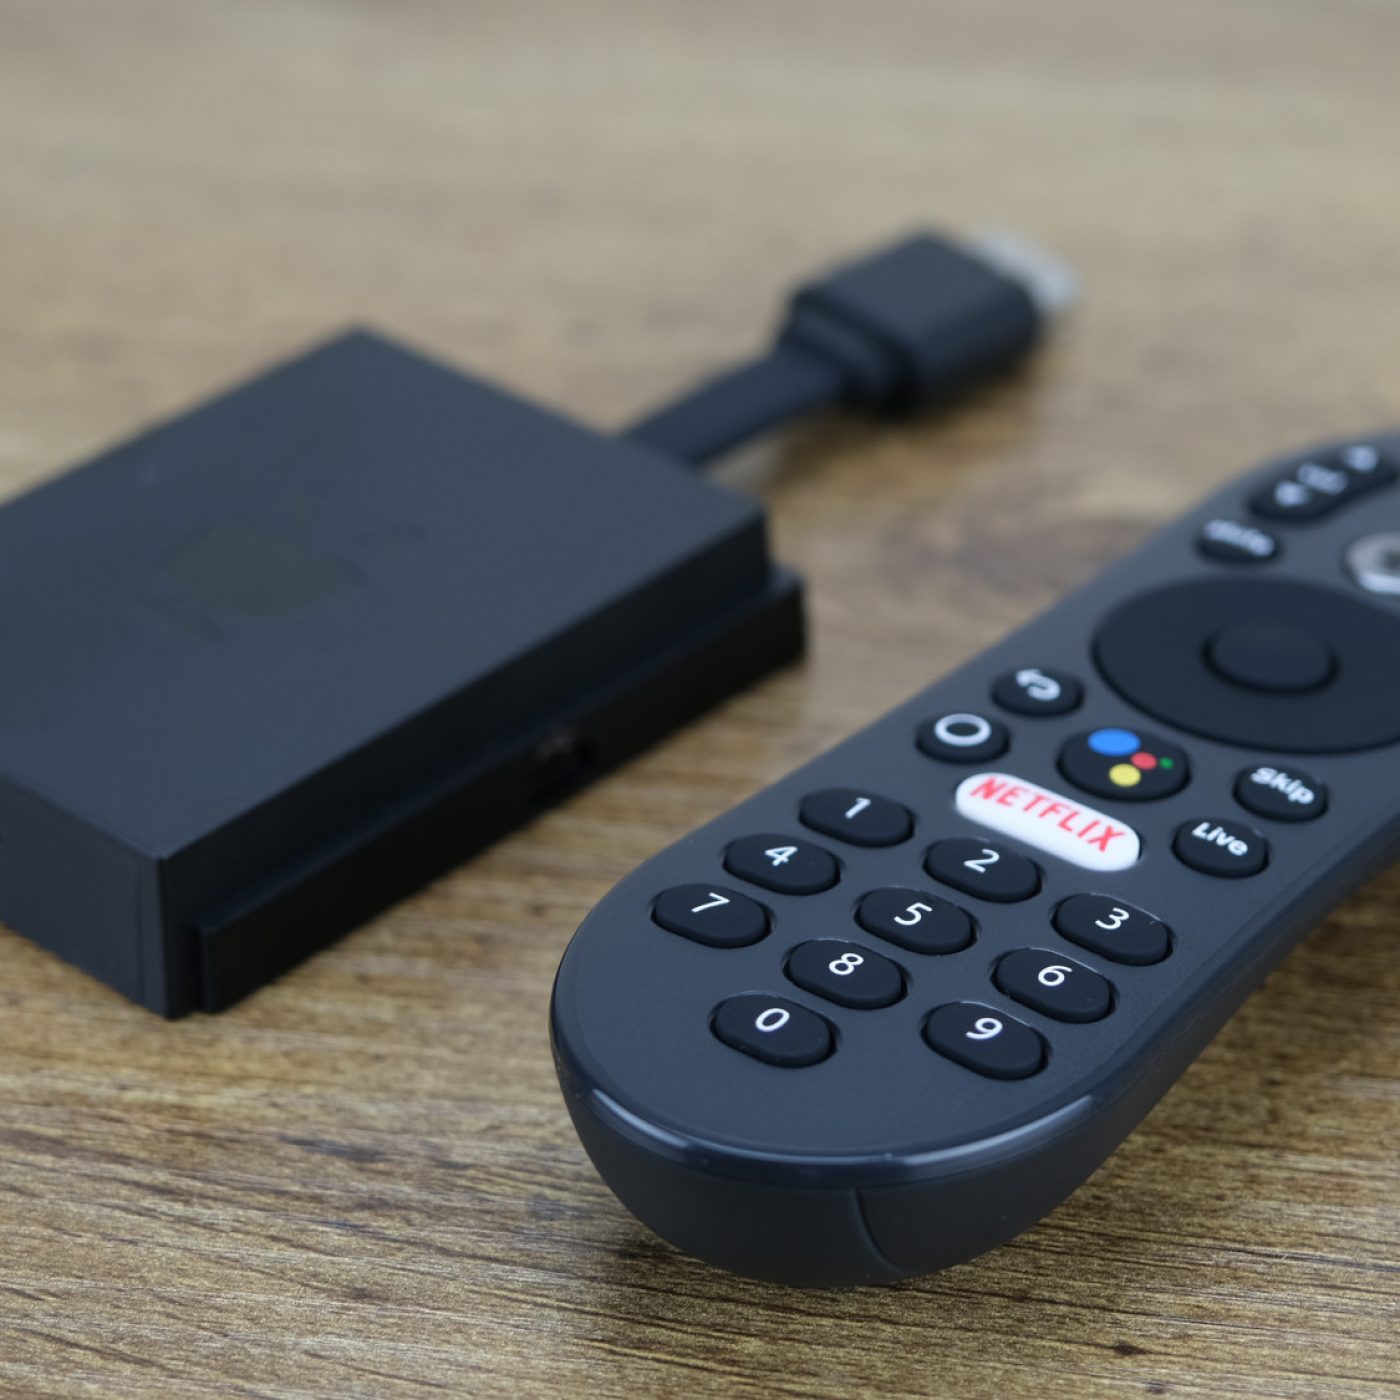 TiVo Stream 4K Streaming Stick Review: Android TV With TiVo